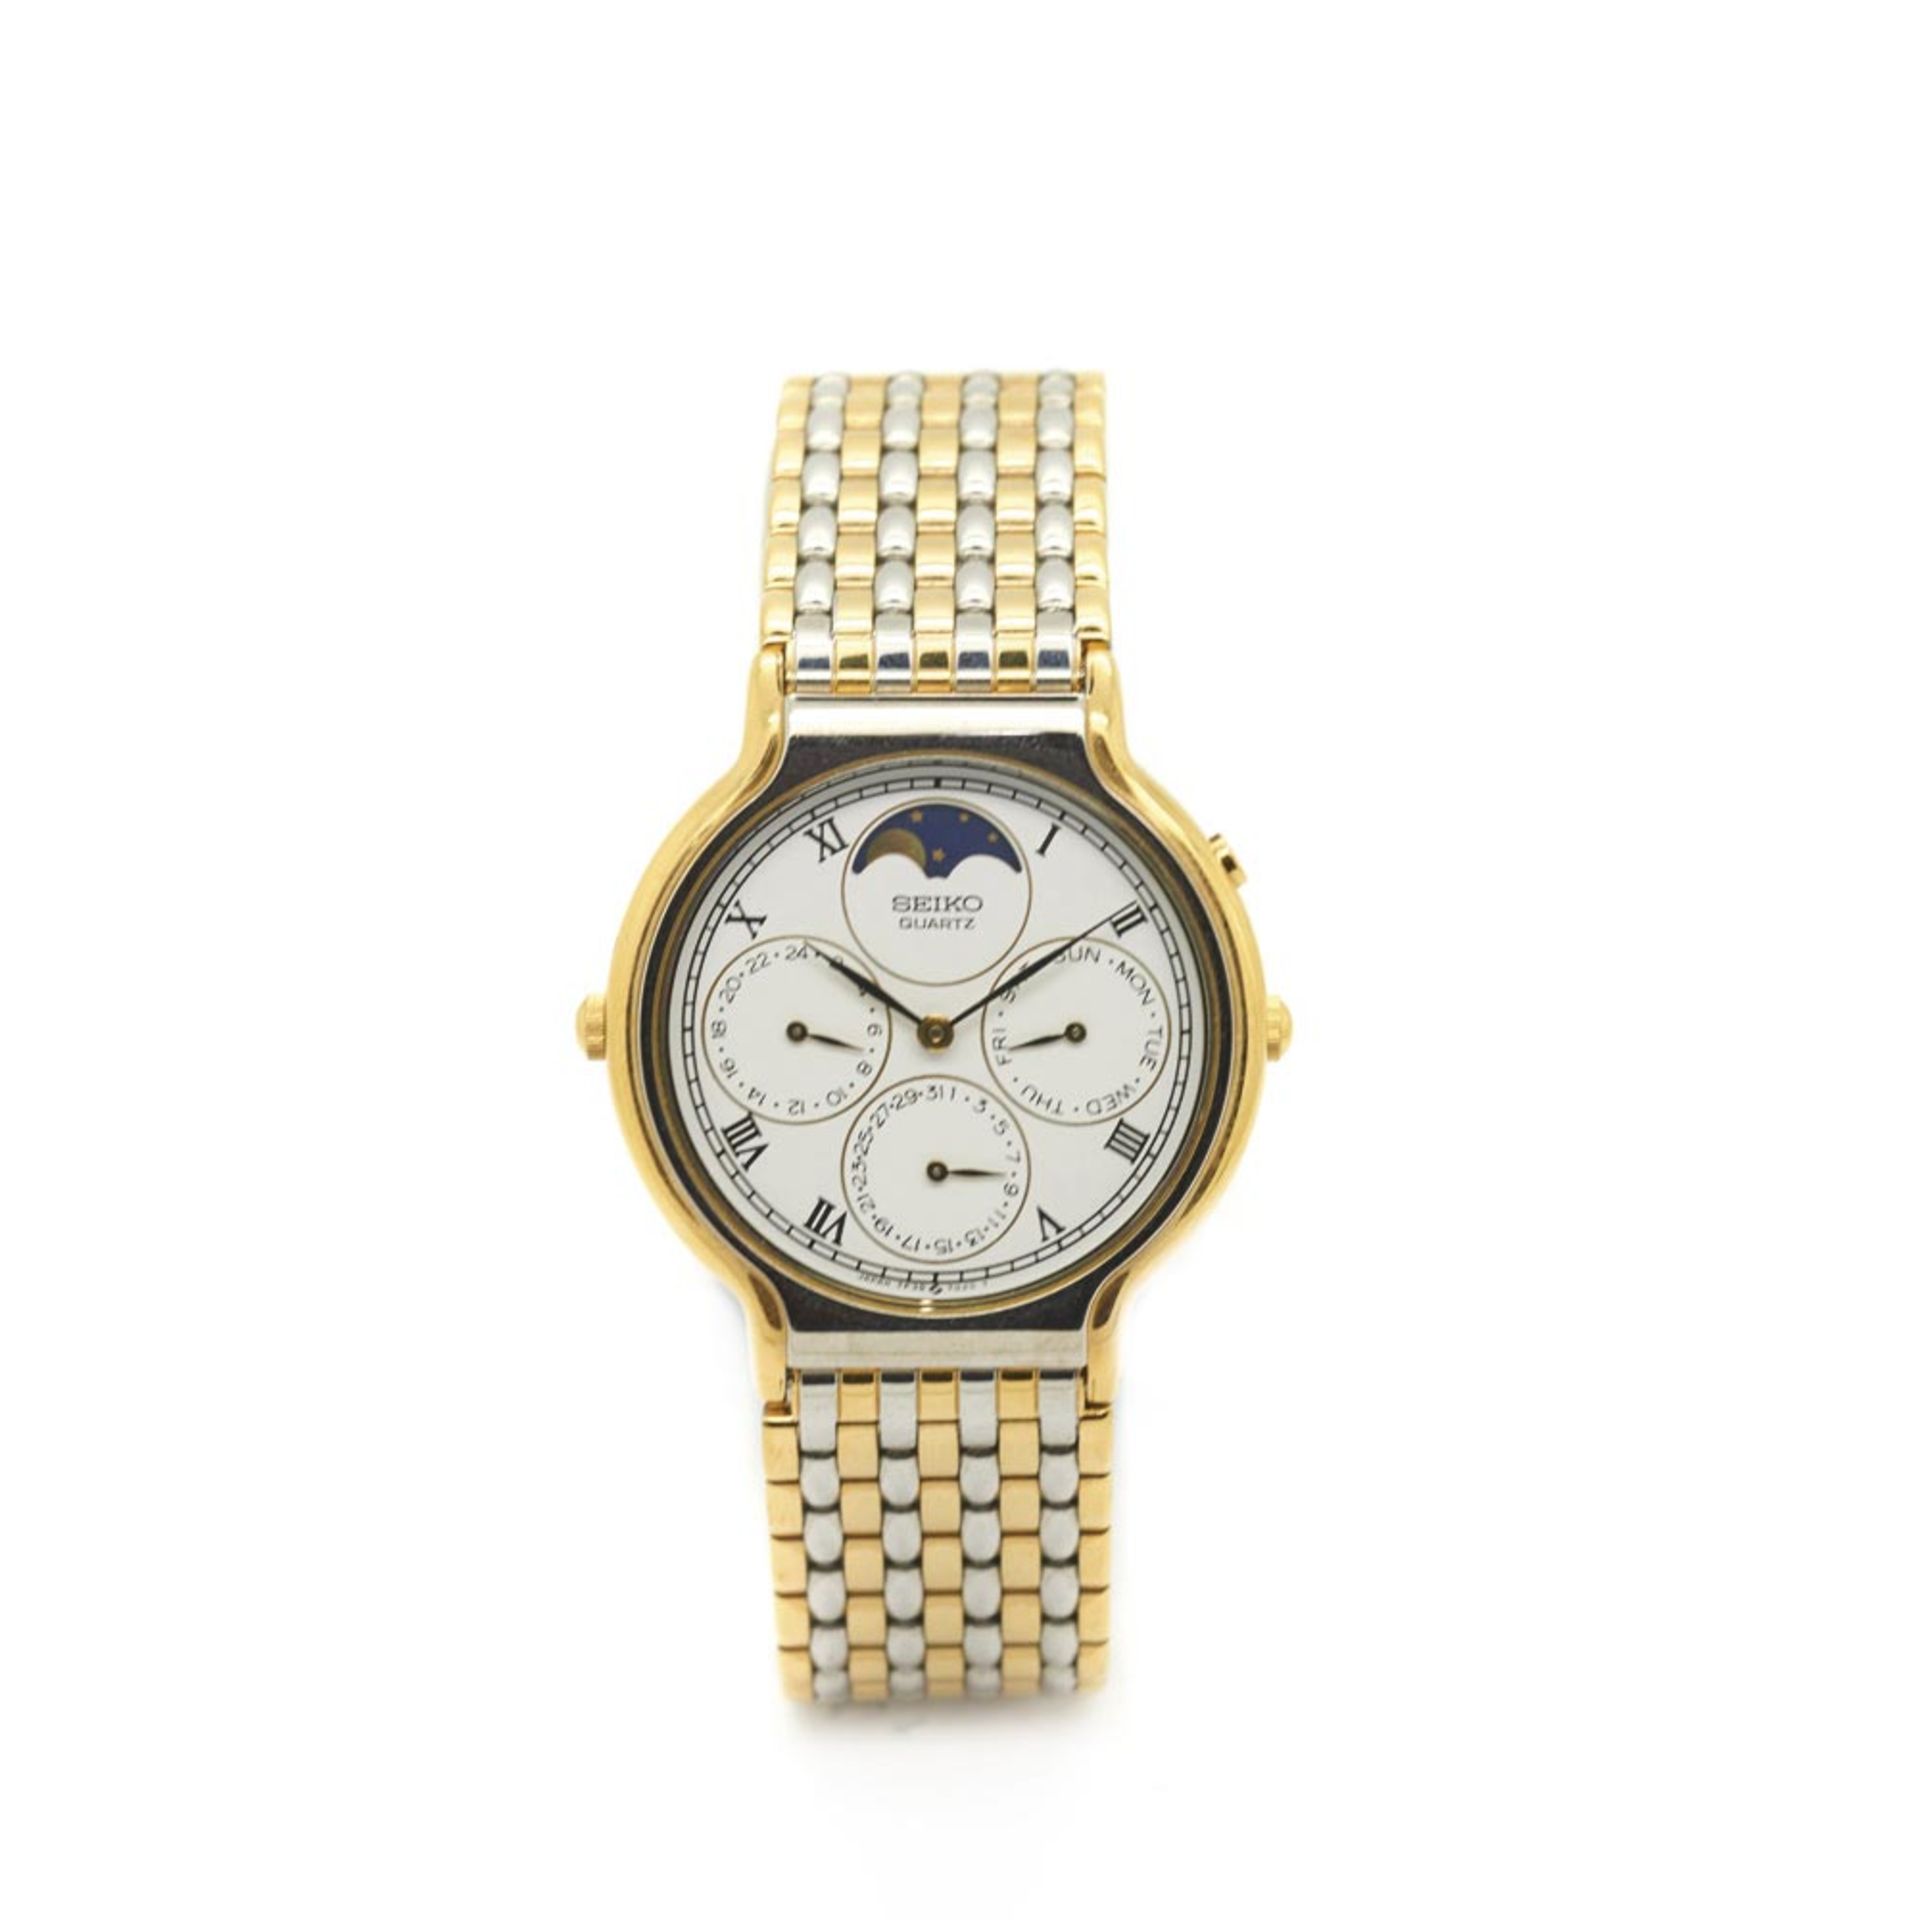 Seiko steel and gold plated wristwatch